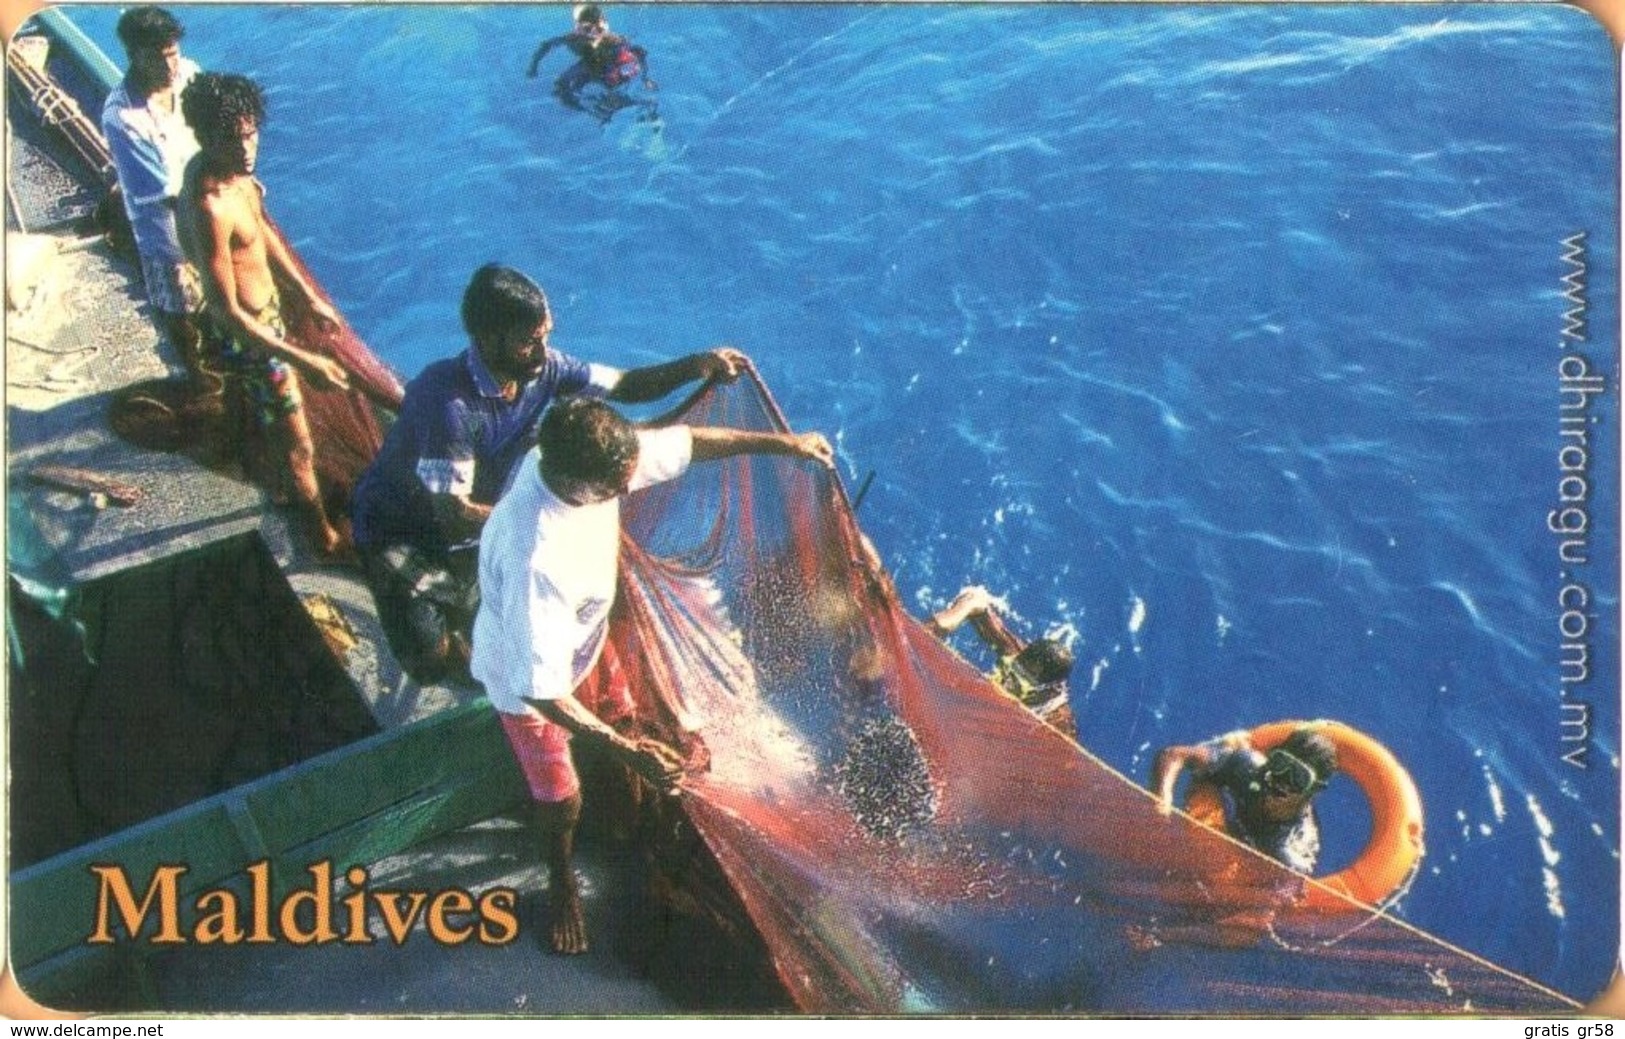 Maldives - MAL-C-23A, Fishermen And Swimmers, Fishery, 2/02, Used As Scan - Maldiven